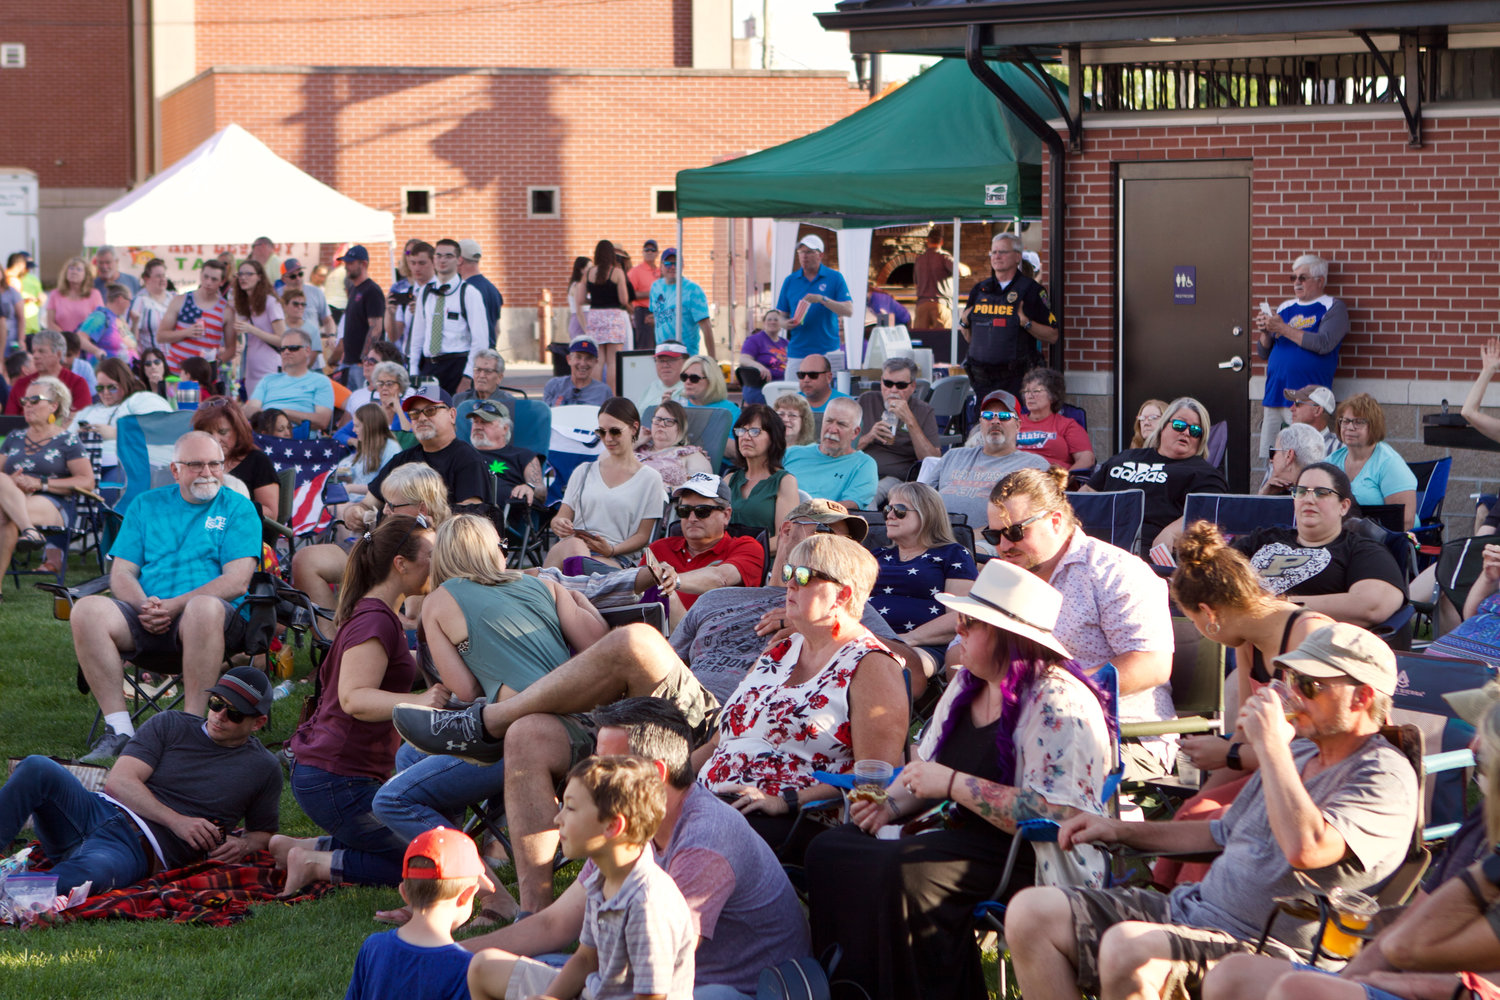 A large crowd gathered Friday for the Crawfordsville Main Street's First Friday event featuring The Tony Bryant Project Band. The next First Friday is July 1st and will have the Micheal Kelsey Band performing. Food trucks and kid zone area is also available.